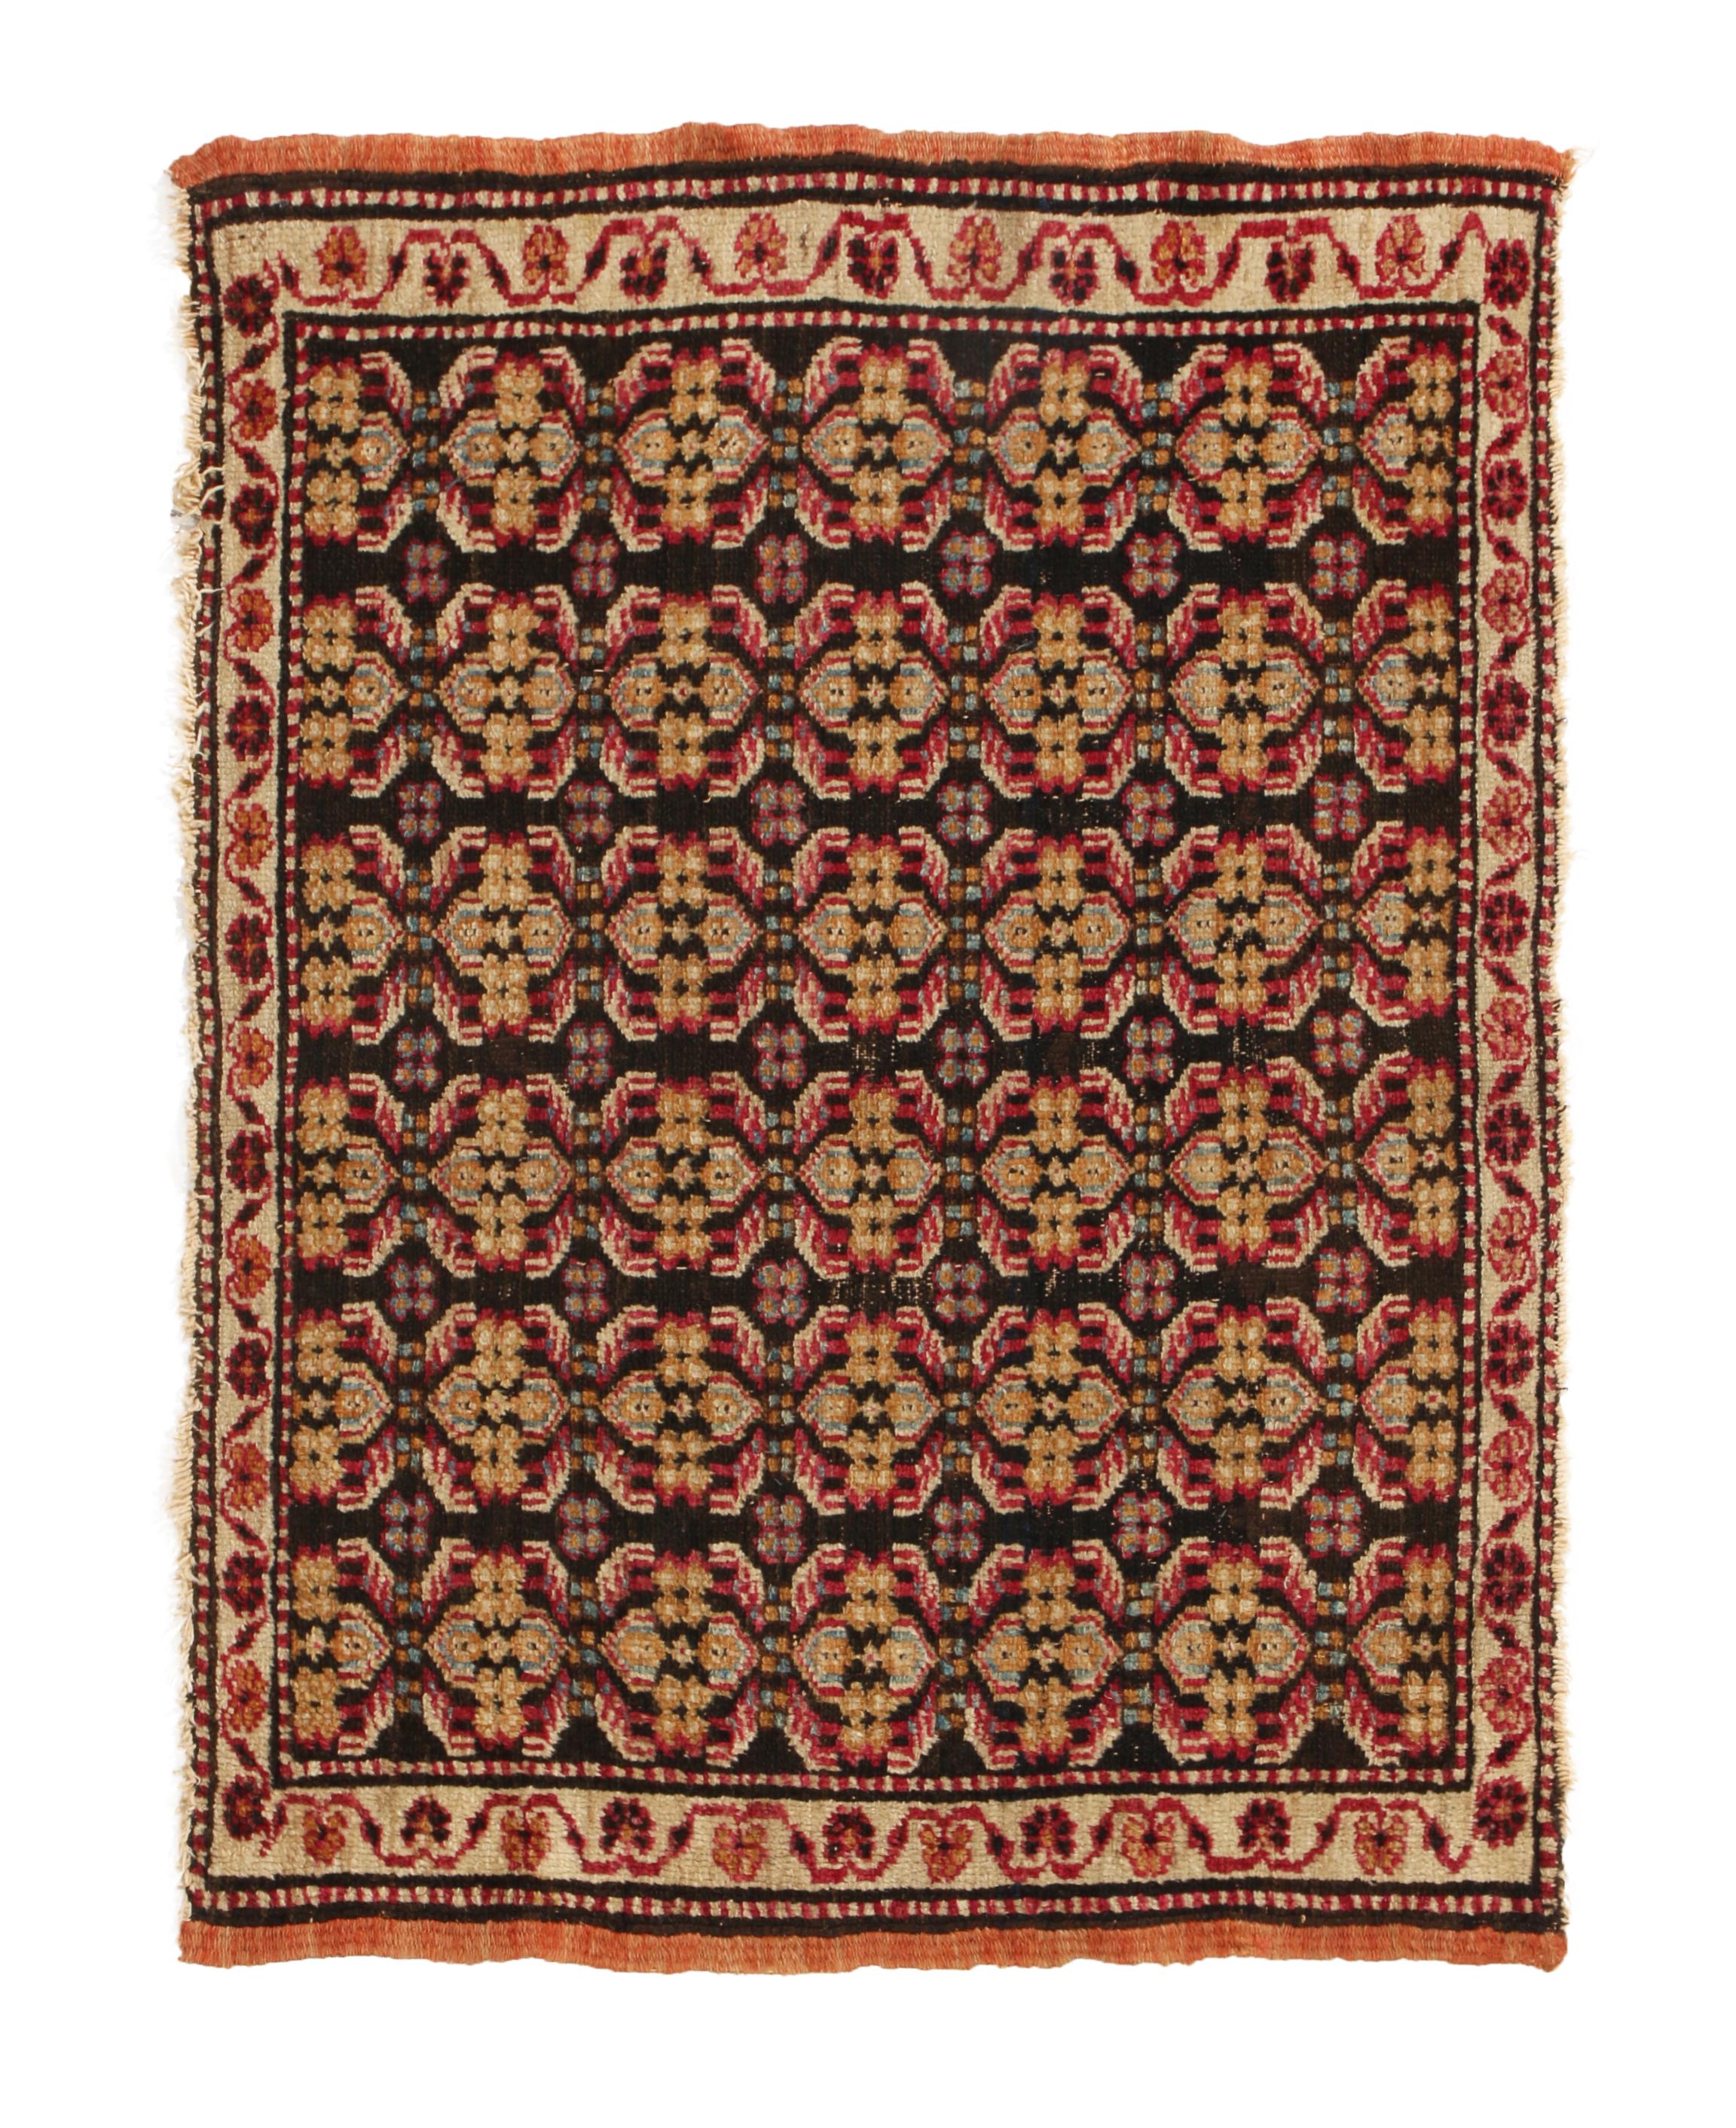 Hailing from India between 1890-1900, this hypnotic antique Agra rug is hand knotted in high quality wool with a hypnotic departure from traditional designs in its field. Emboldened by an partisan pairing of beige and red colorways against black